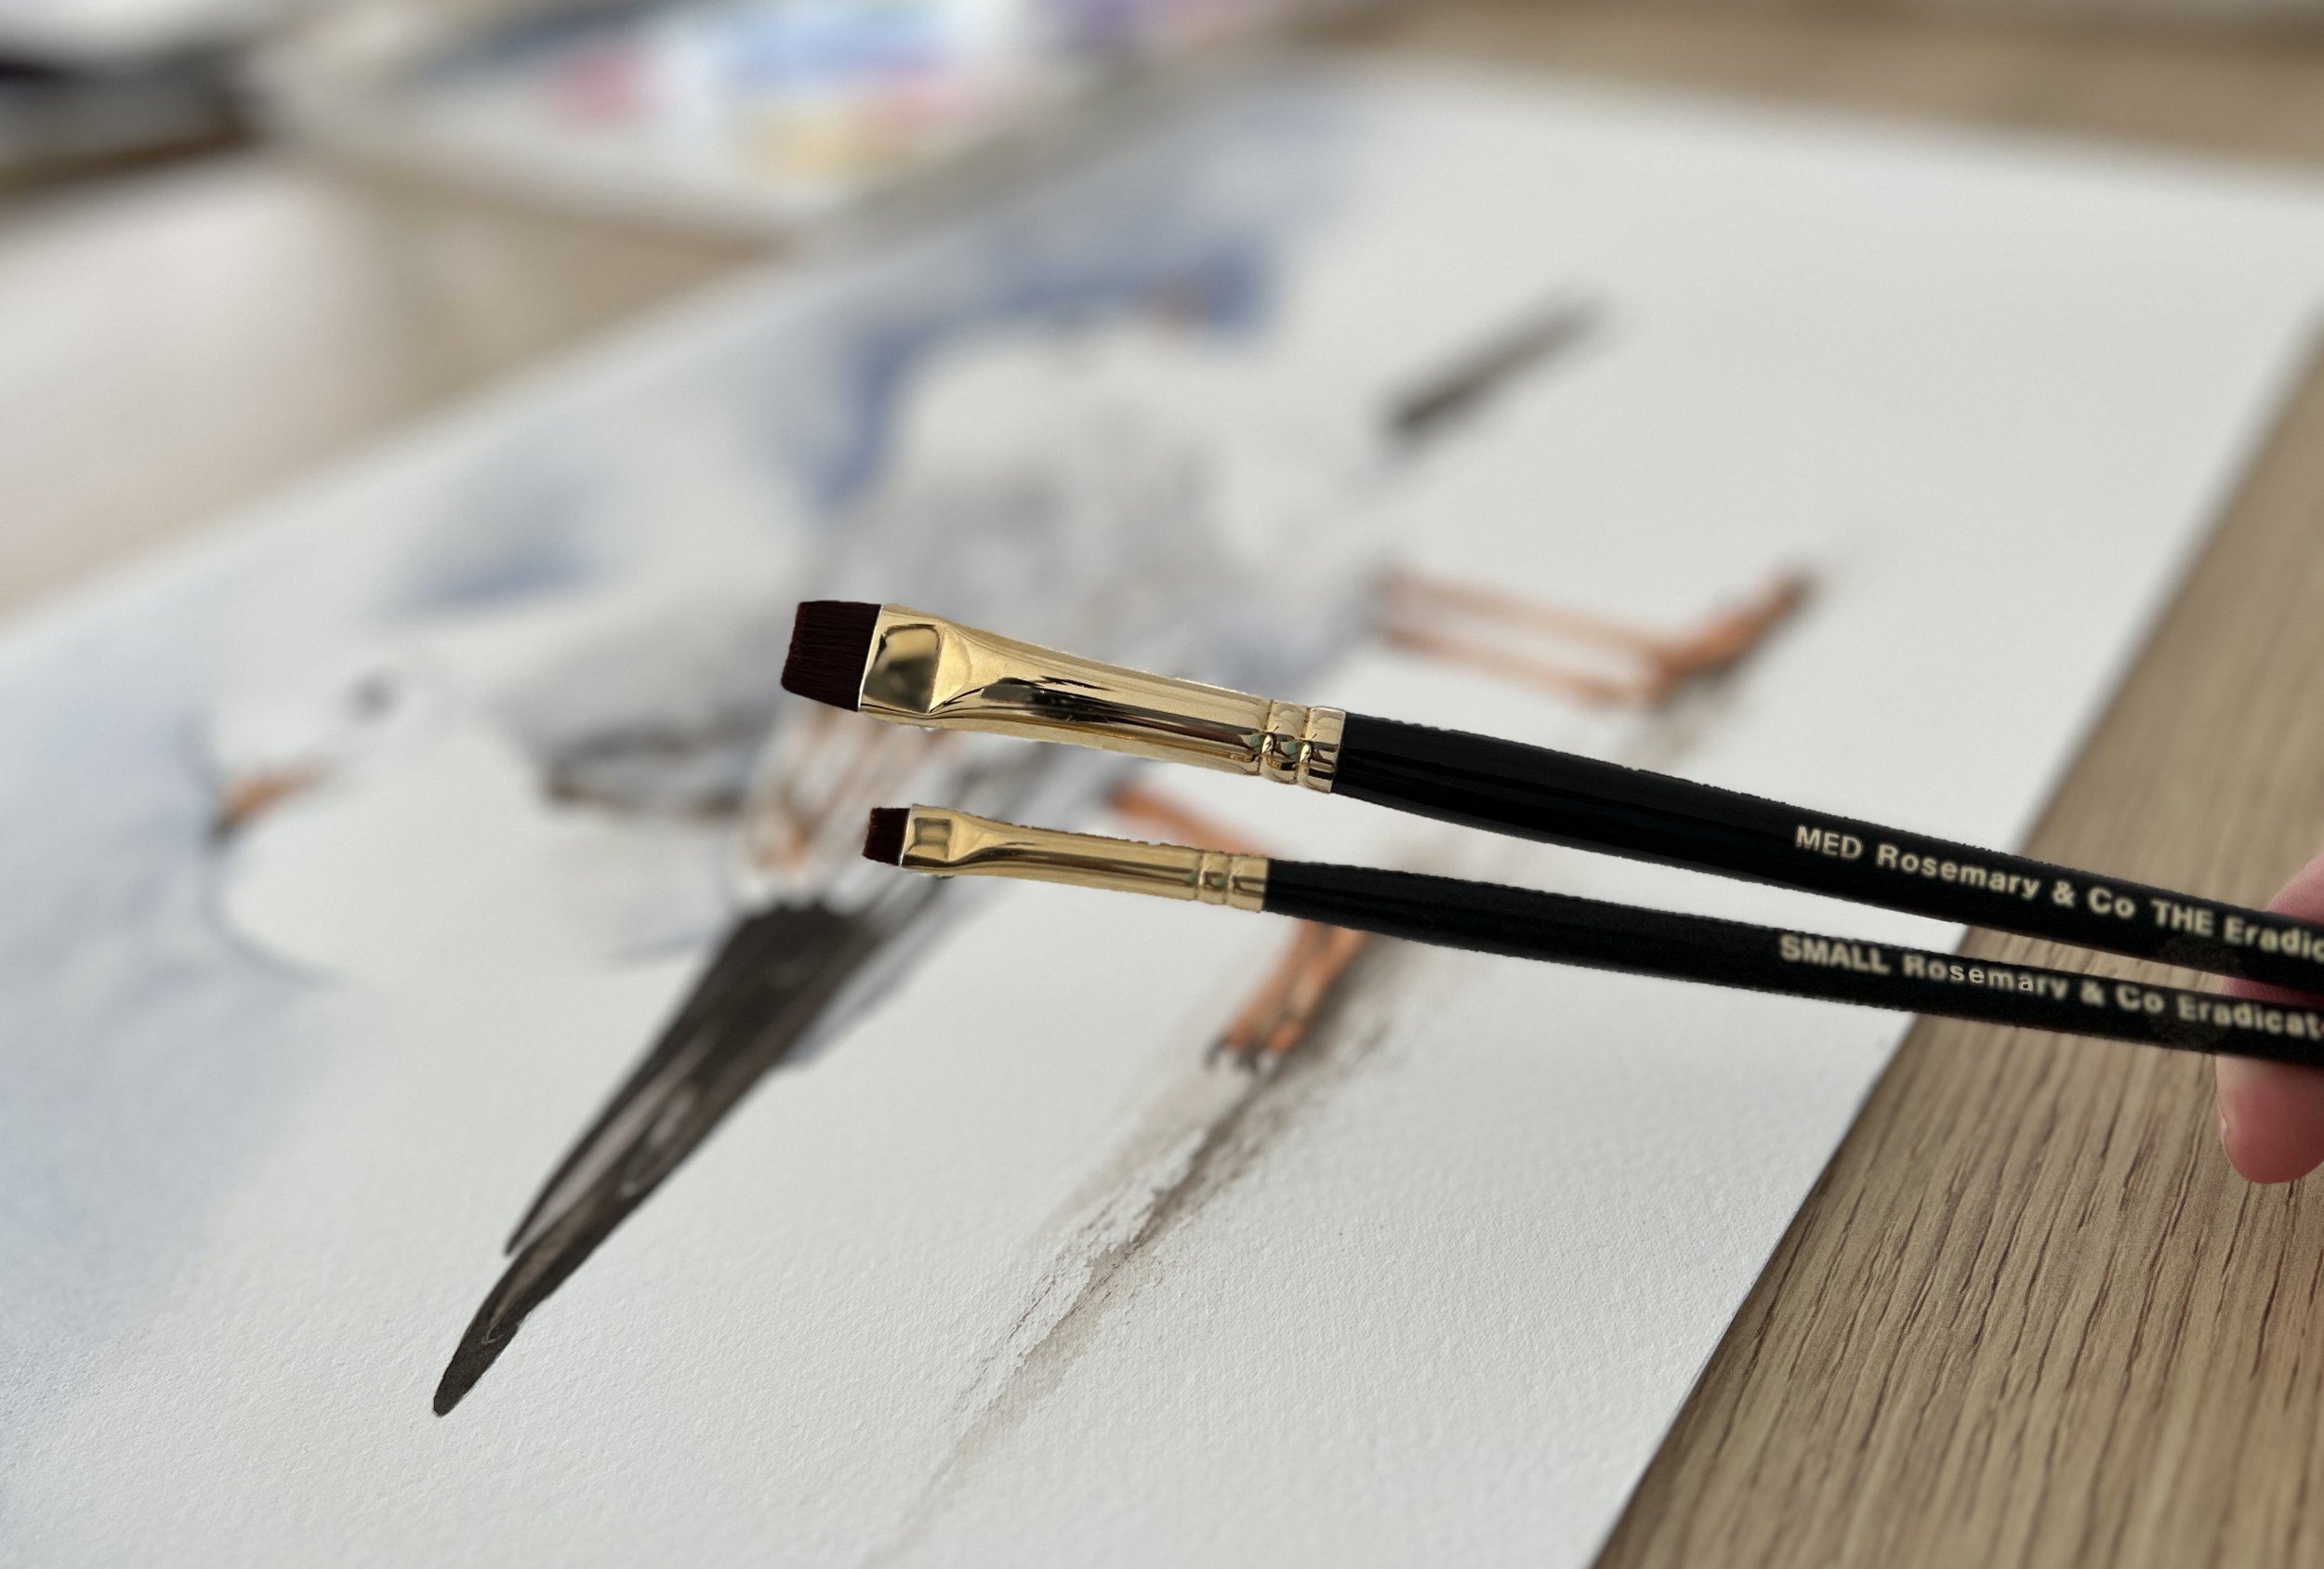 What are the best Art Paintbrush Sets according to Reddit?